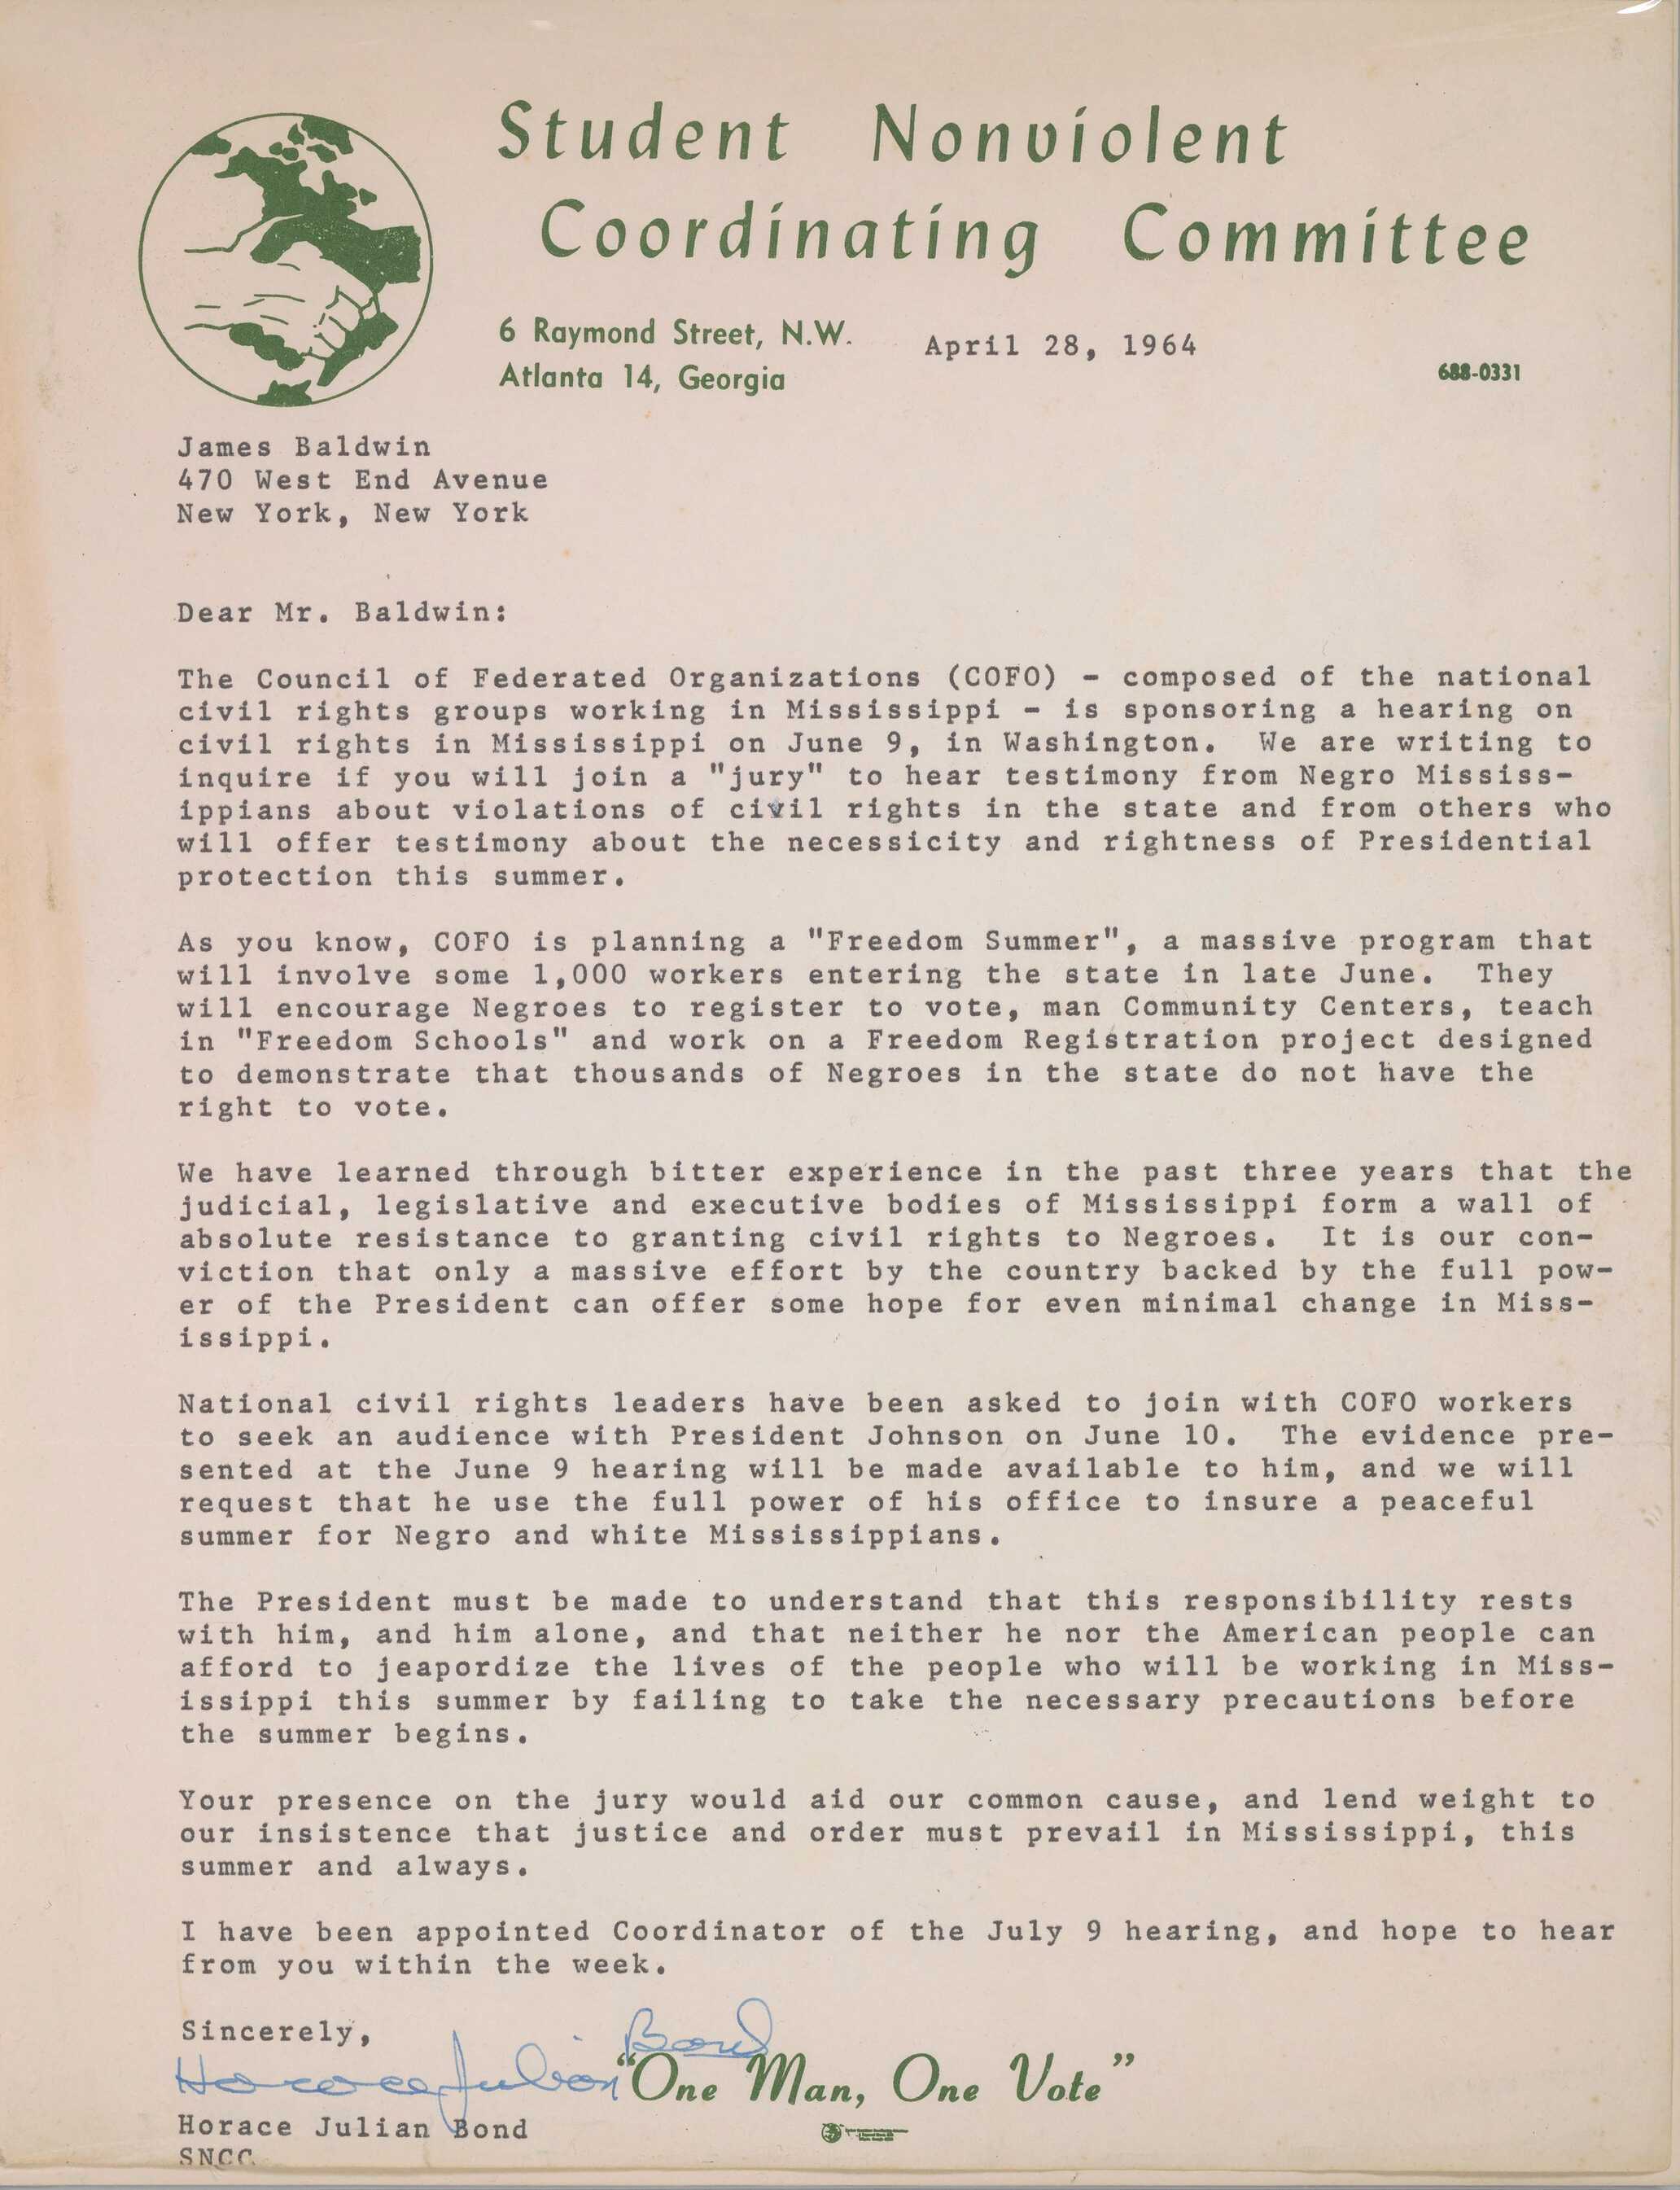 An April 28, 1964 letter to James Baldwin from the Student Nonviolent Coordinating Committee's communications director, Julian Bond, inviting Baldwin to hear testimony from "Negro Mississippians about violations of civil rights..." in Washington D.C.